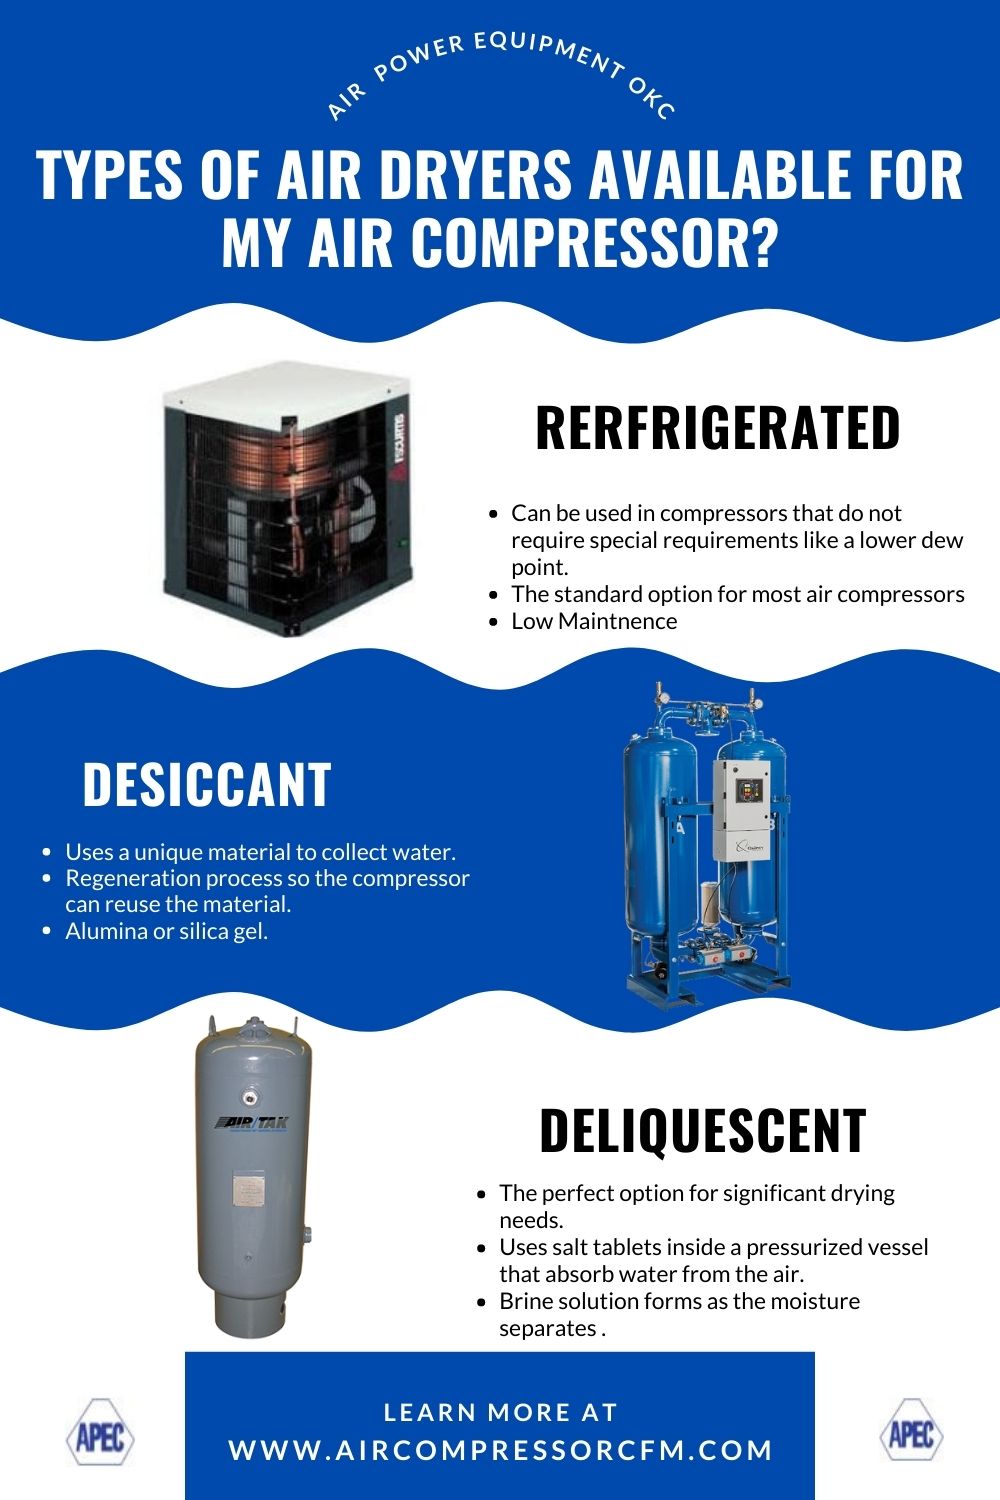 This is an infographic about the 3 most common air dryers for an air compressor.